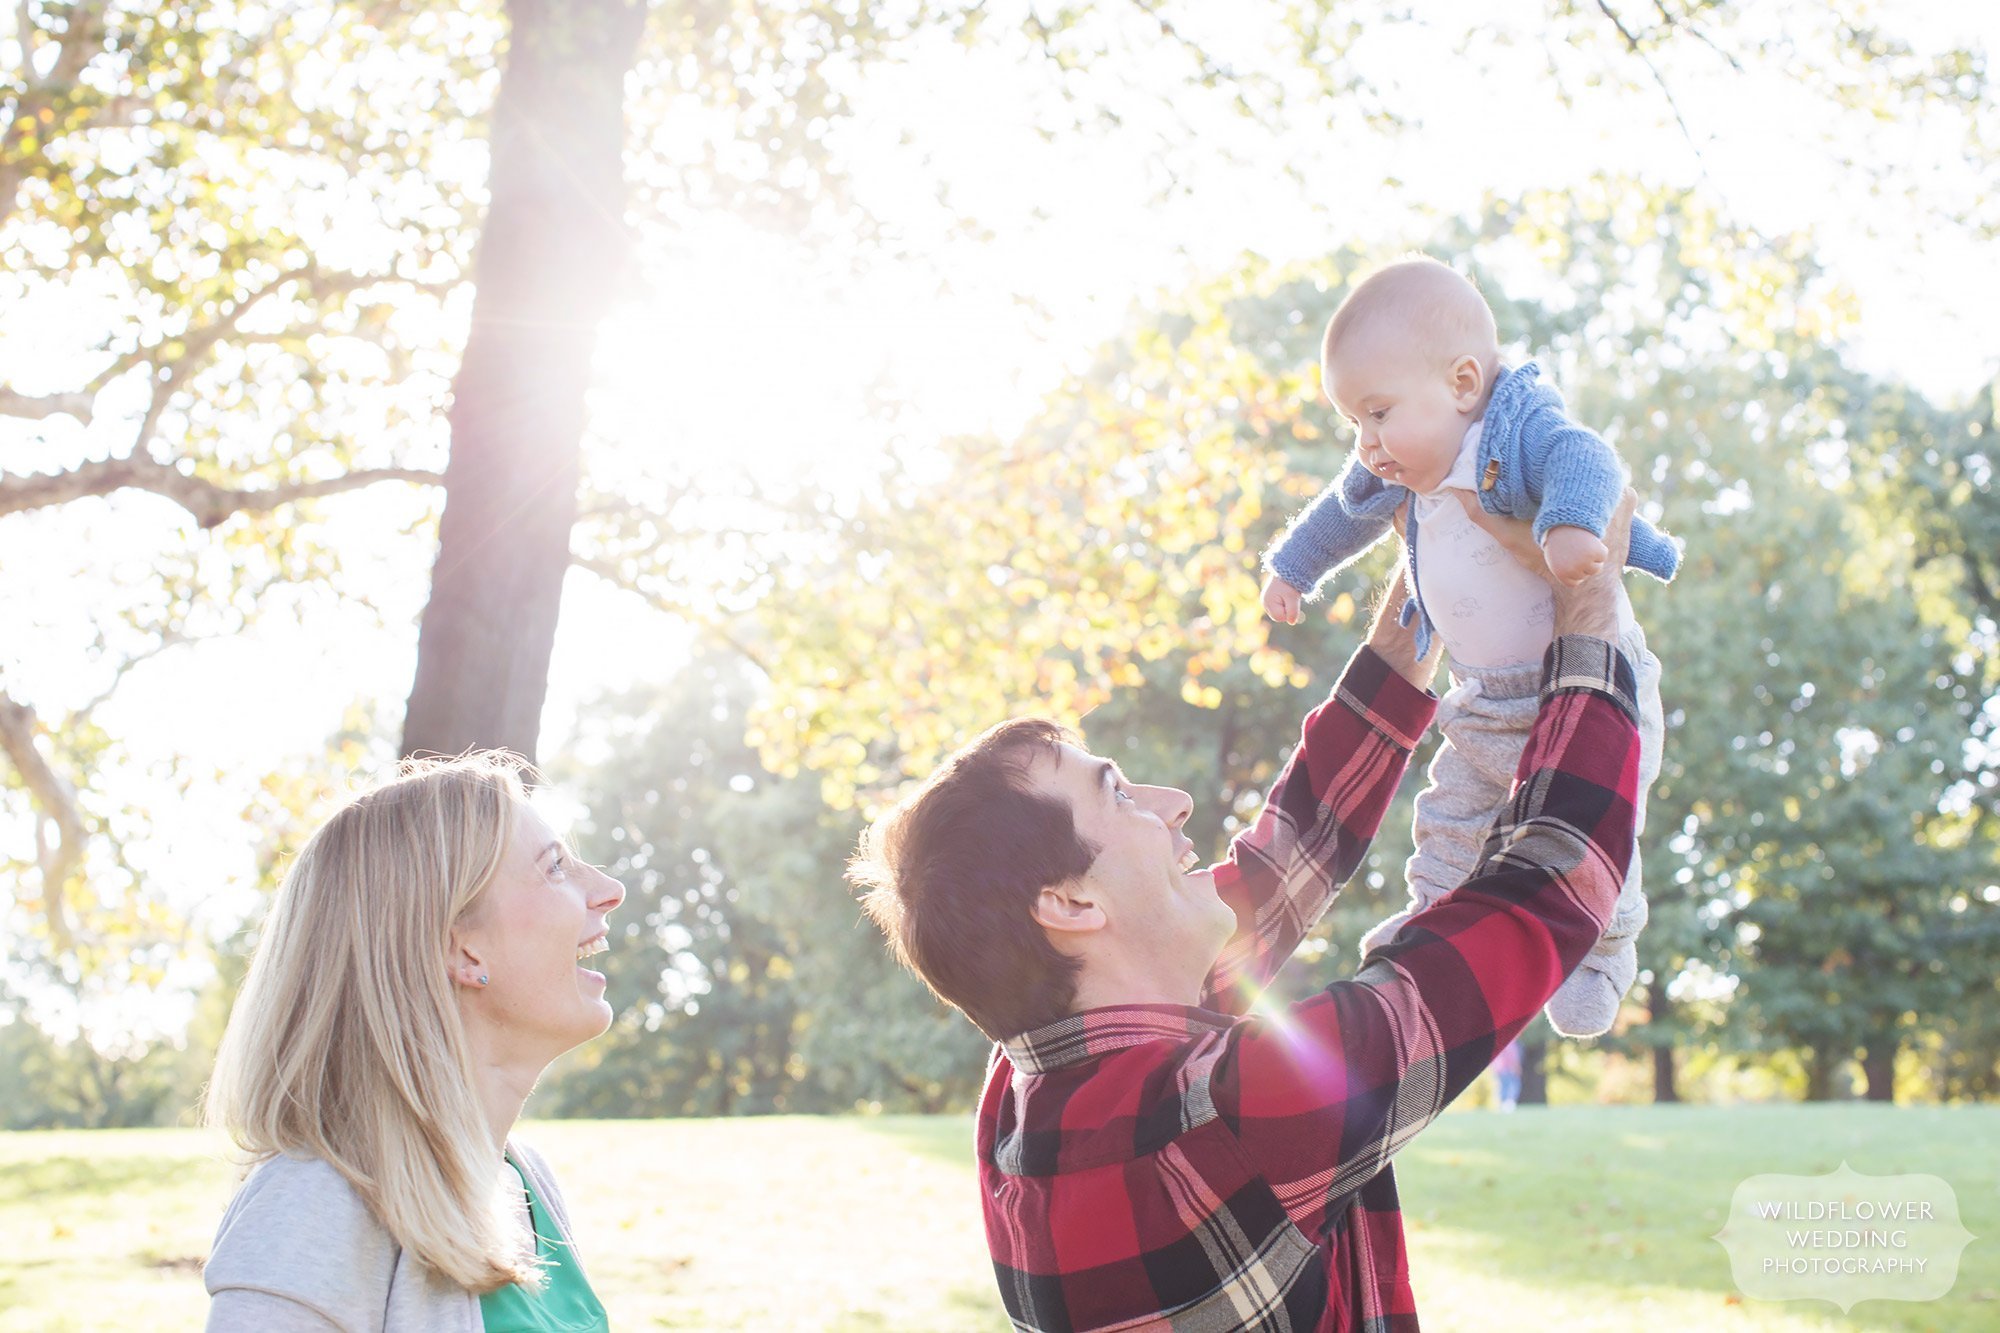 The dad lifts up his baby in the air during this family portrait shoot in KC.